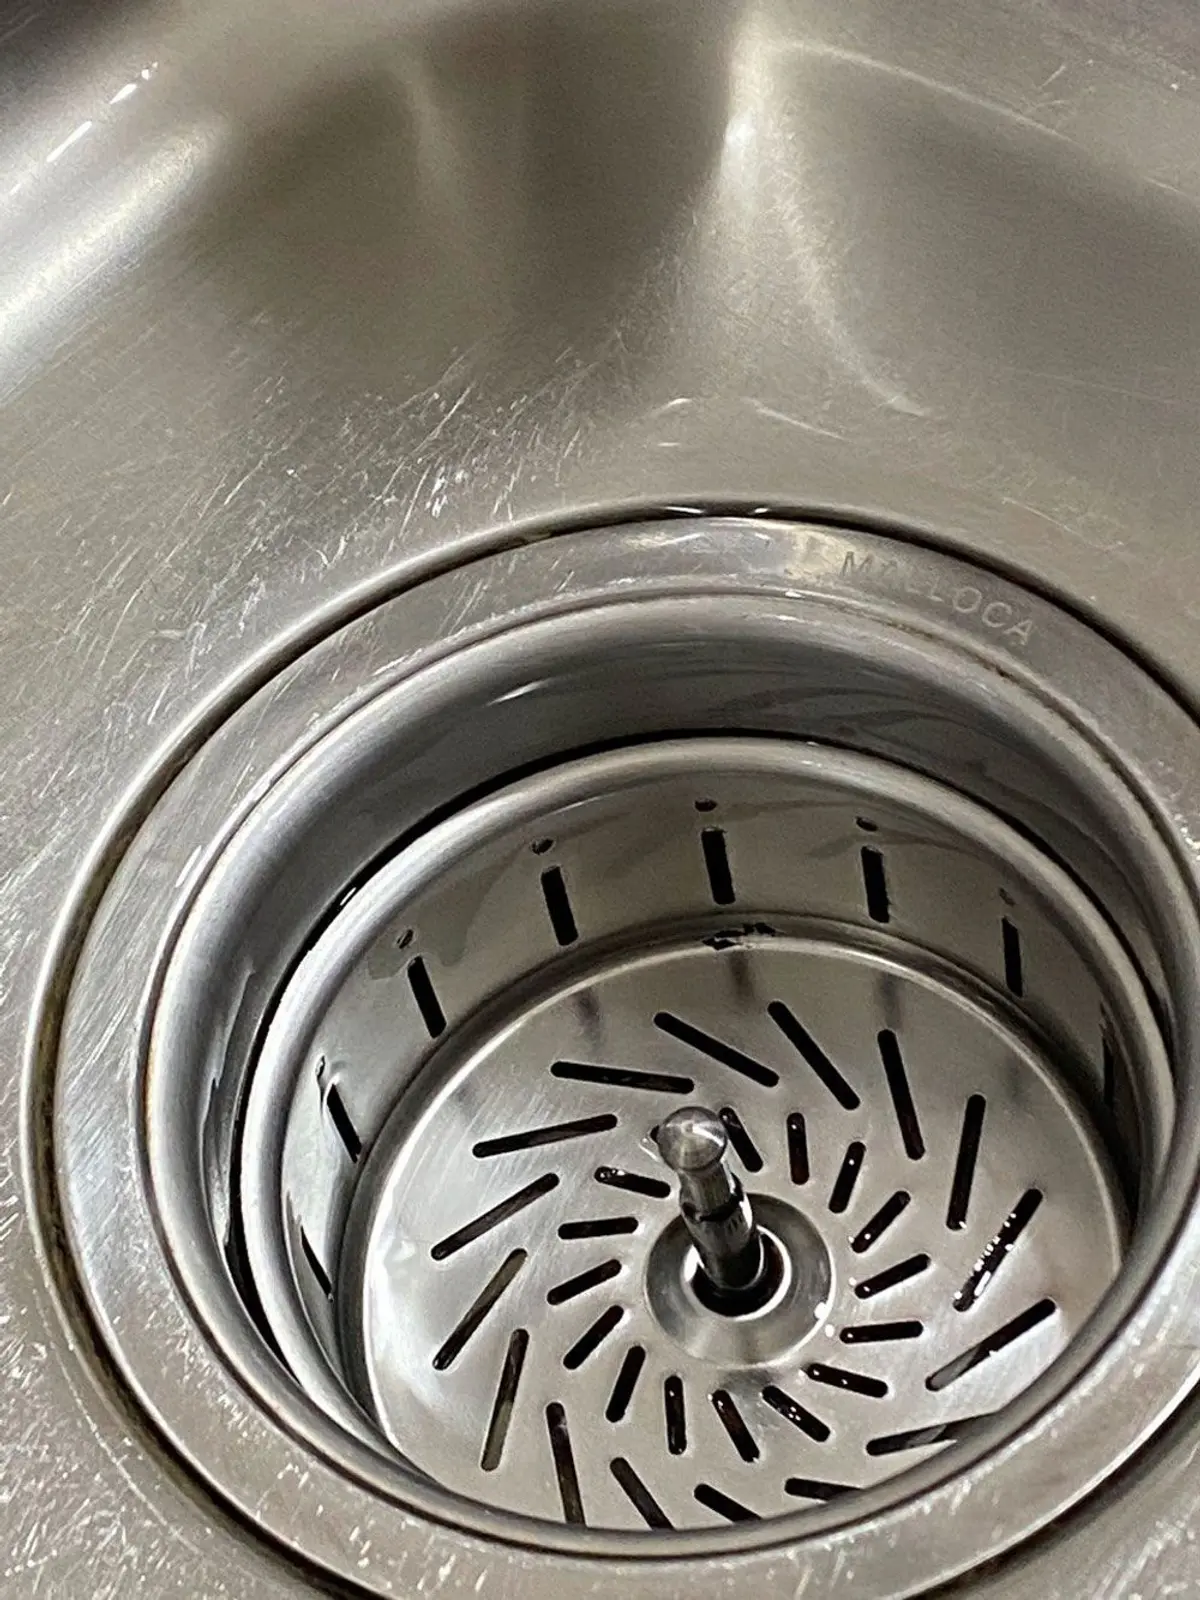 After Cleaning the Stainless Steel Sink with Baking Soda and Vinegar